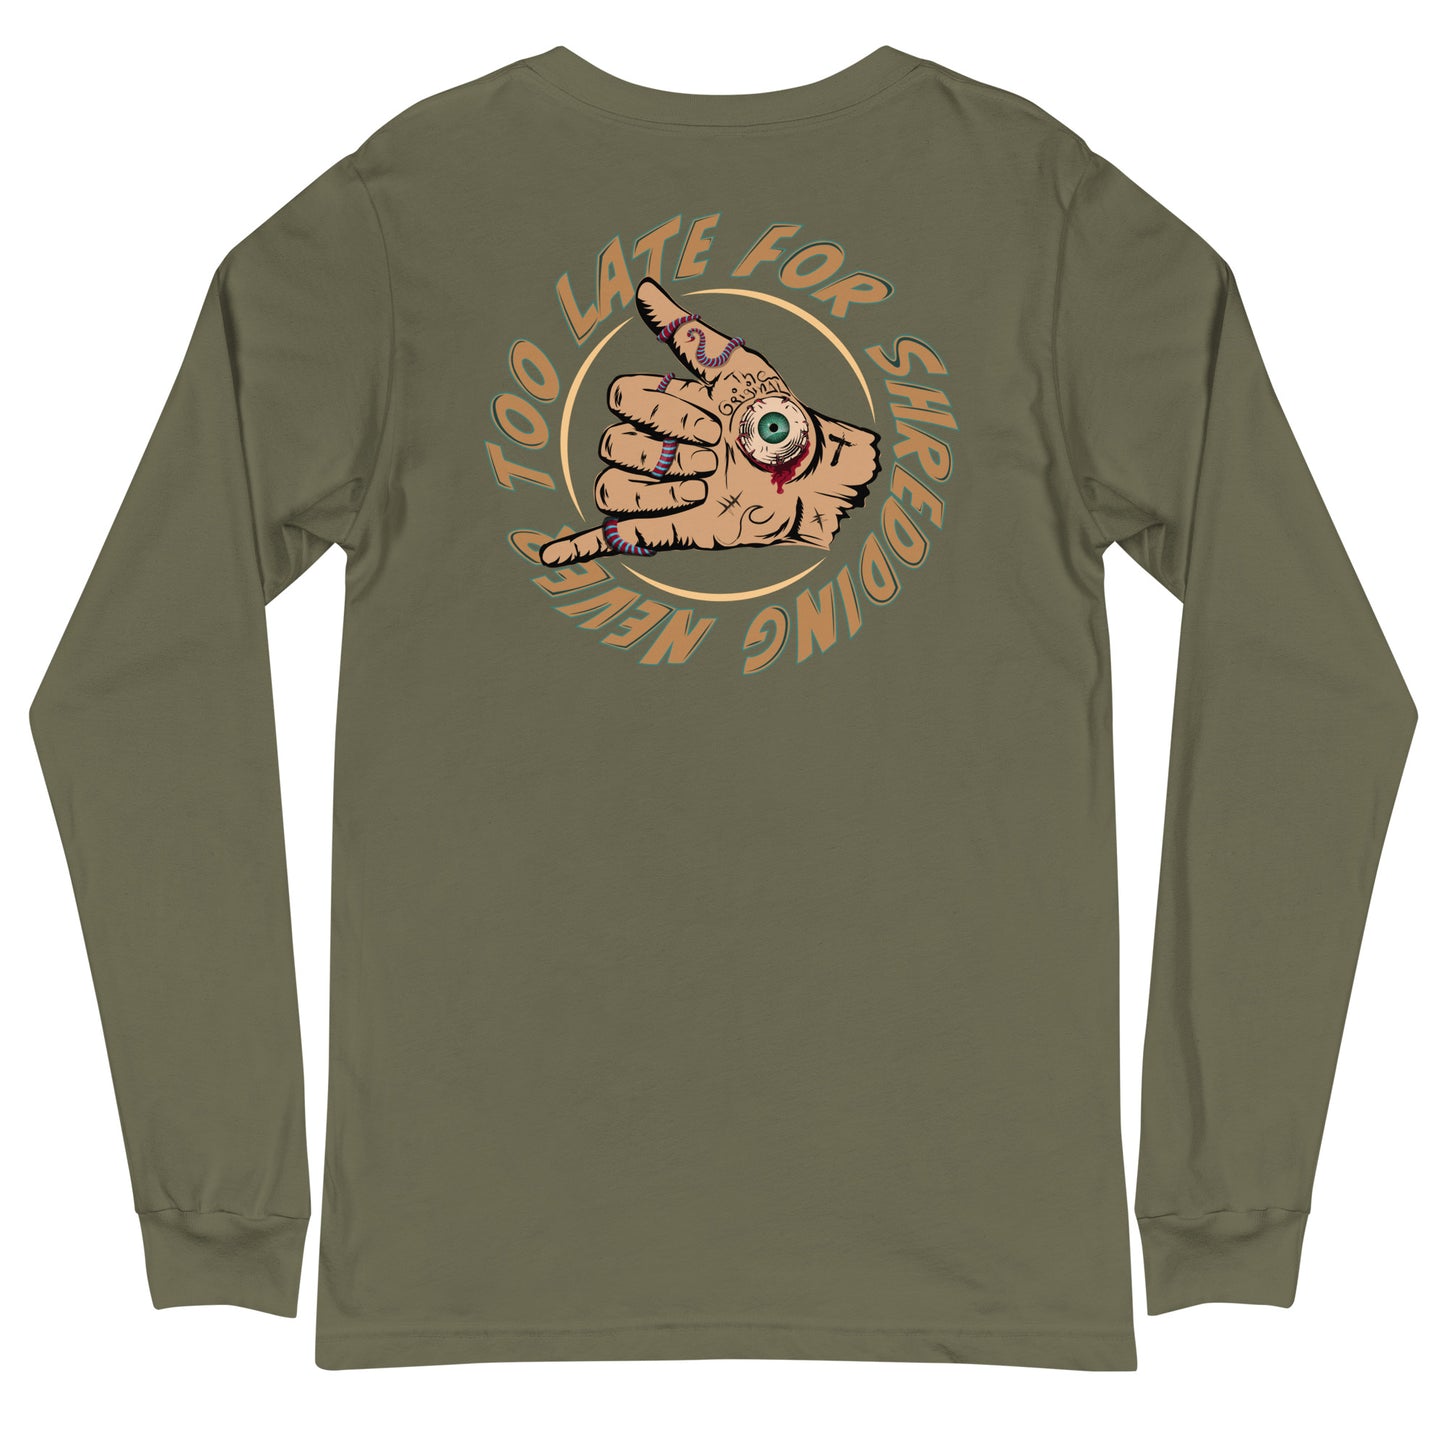 Long Sleeve surfing shaka hand Never Too Late style volcom, dos unisex couleur vert militaire